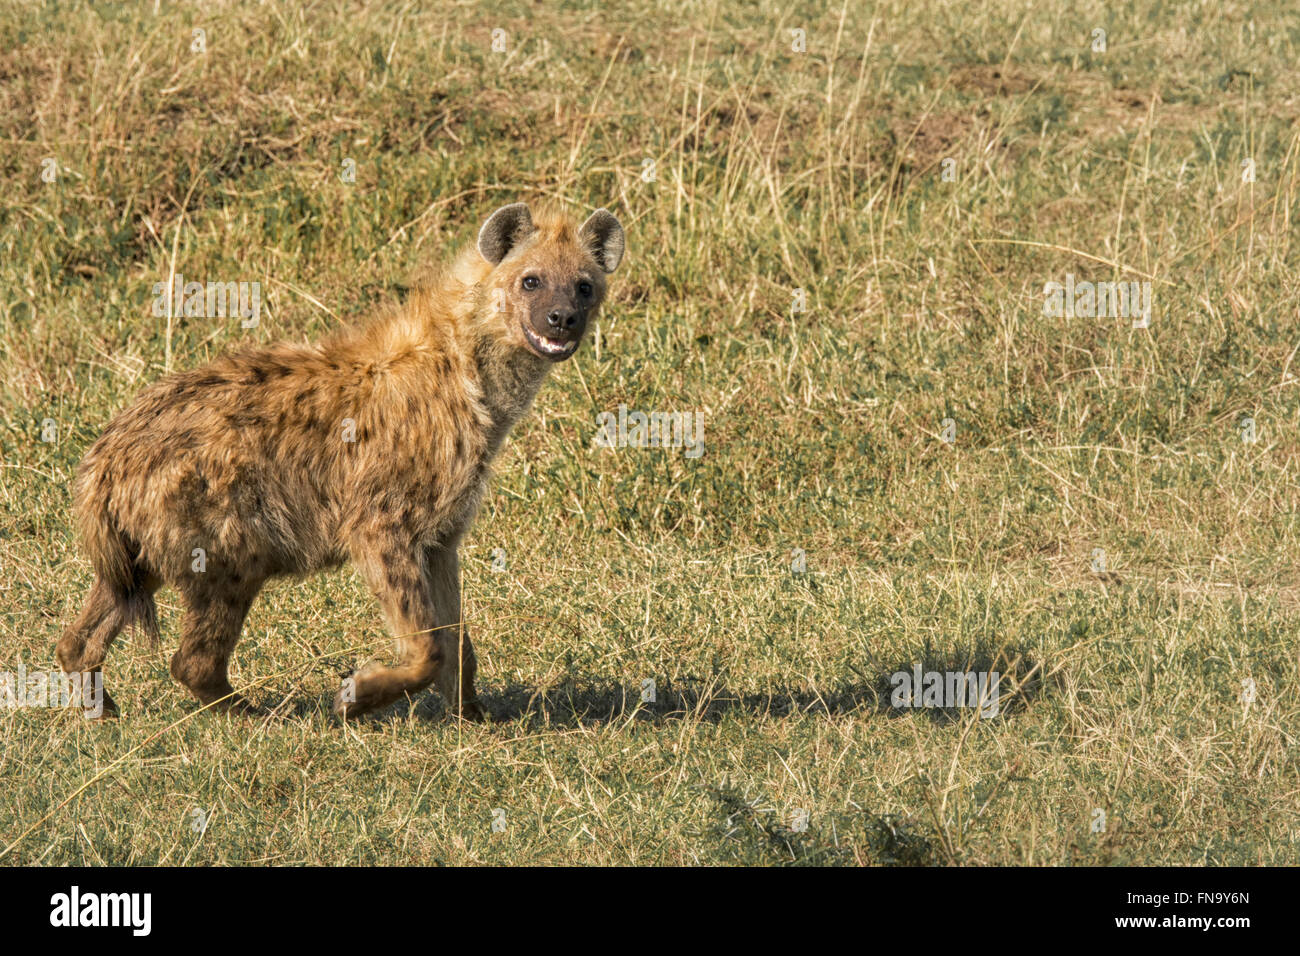 Spotted Hyena, Crocuta crocuta, with mouth open, appearing to smile, walking in the Masai Mara National Reserve, Kenya, Africa Stock Photo